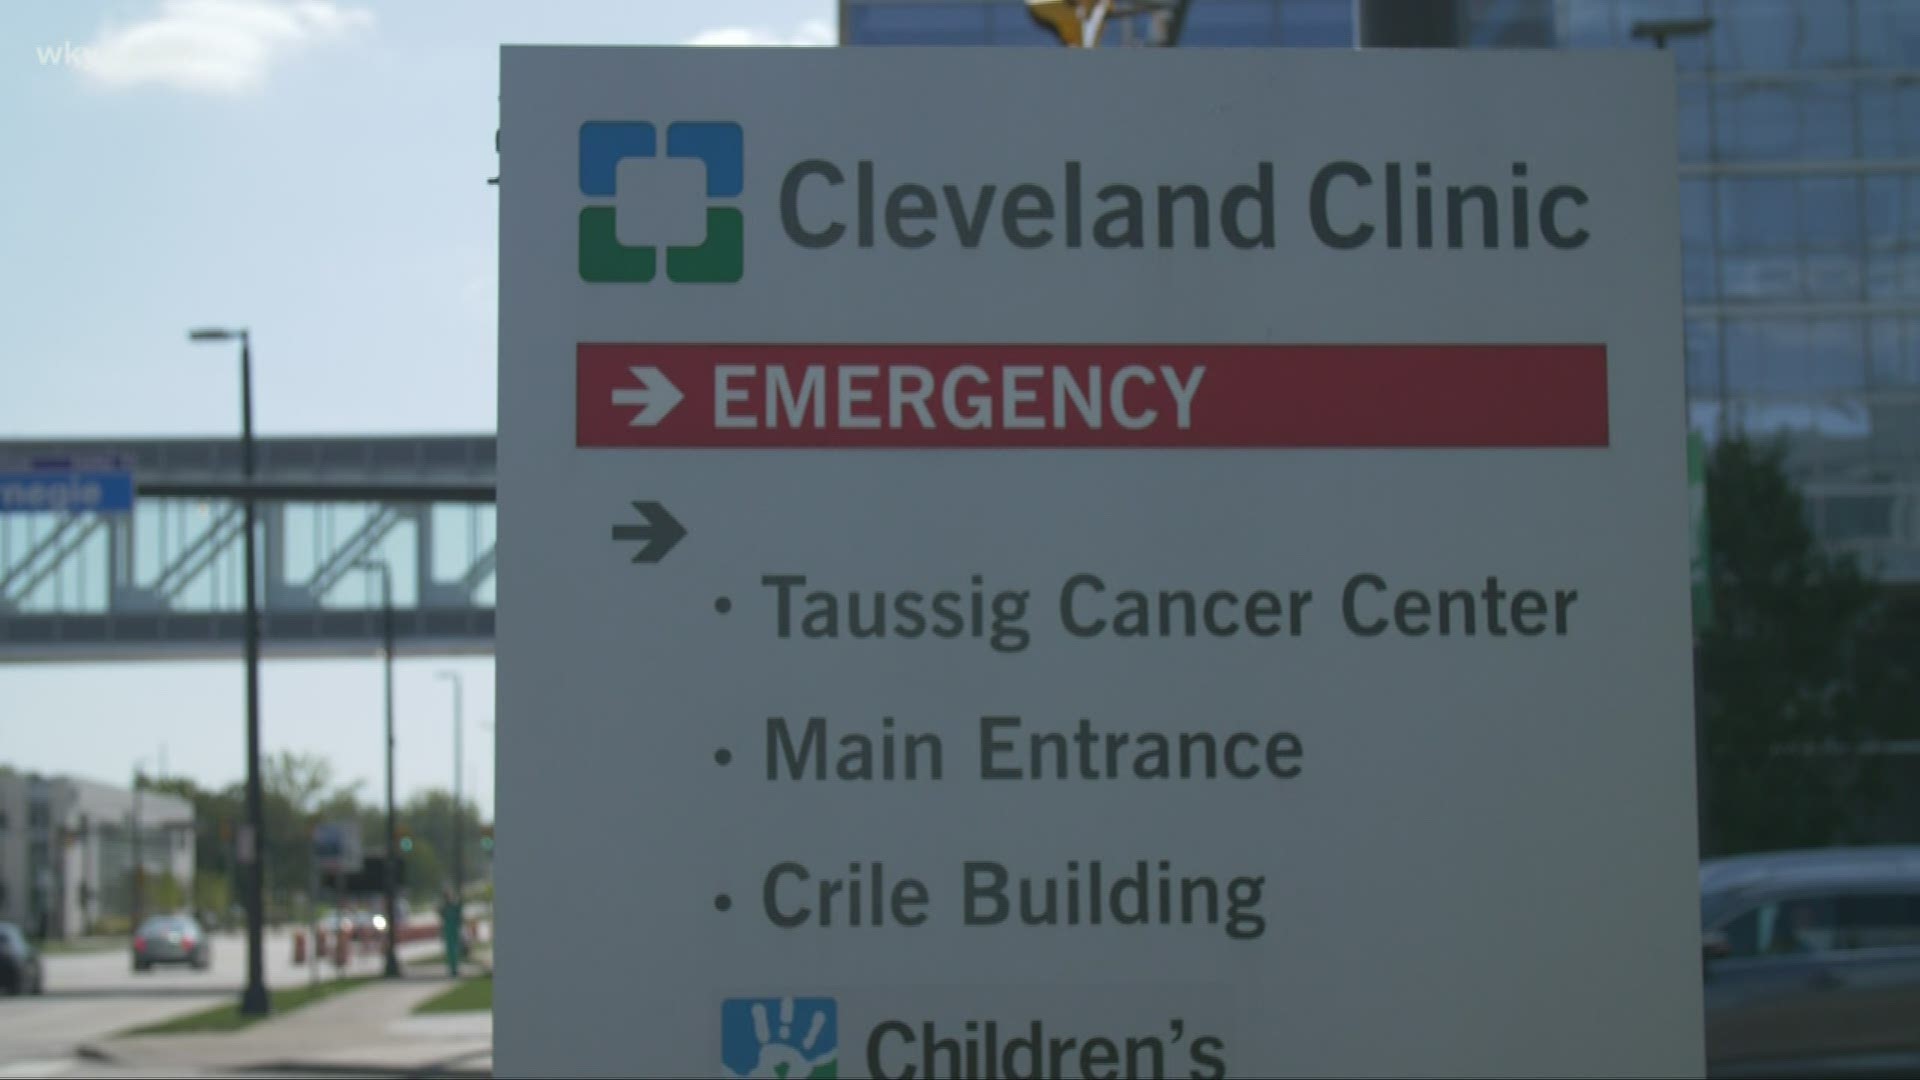 More than 1.7 million people are fighting cancer in the United States. The Cleveland Clinic is raising critical funds to make it easier on patients in treatment.